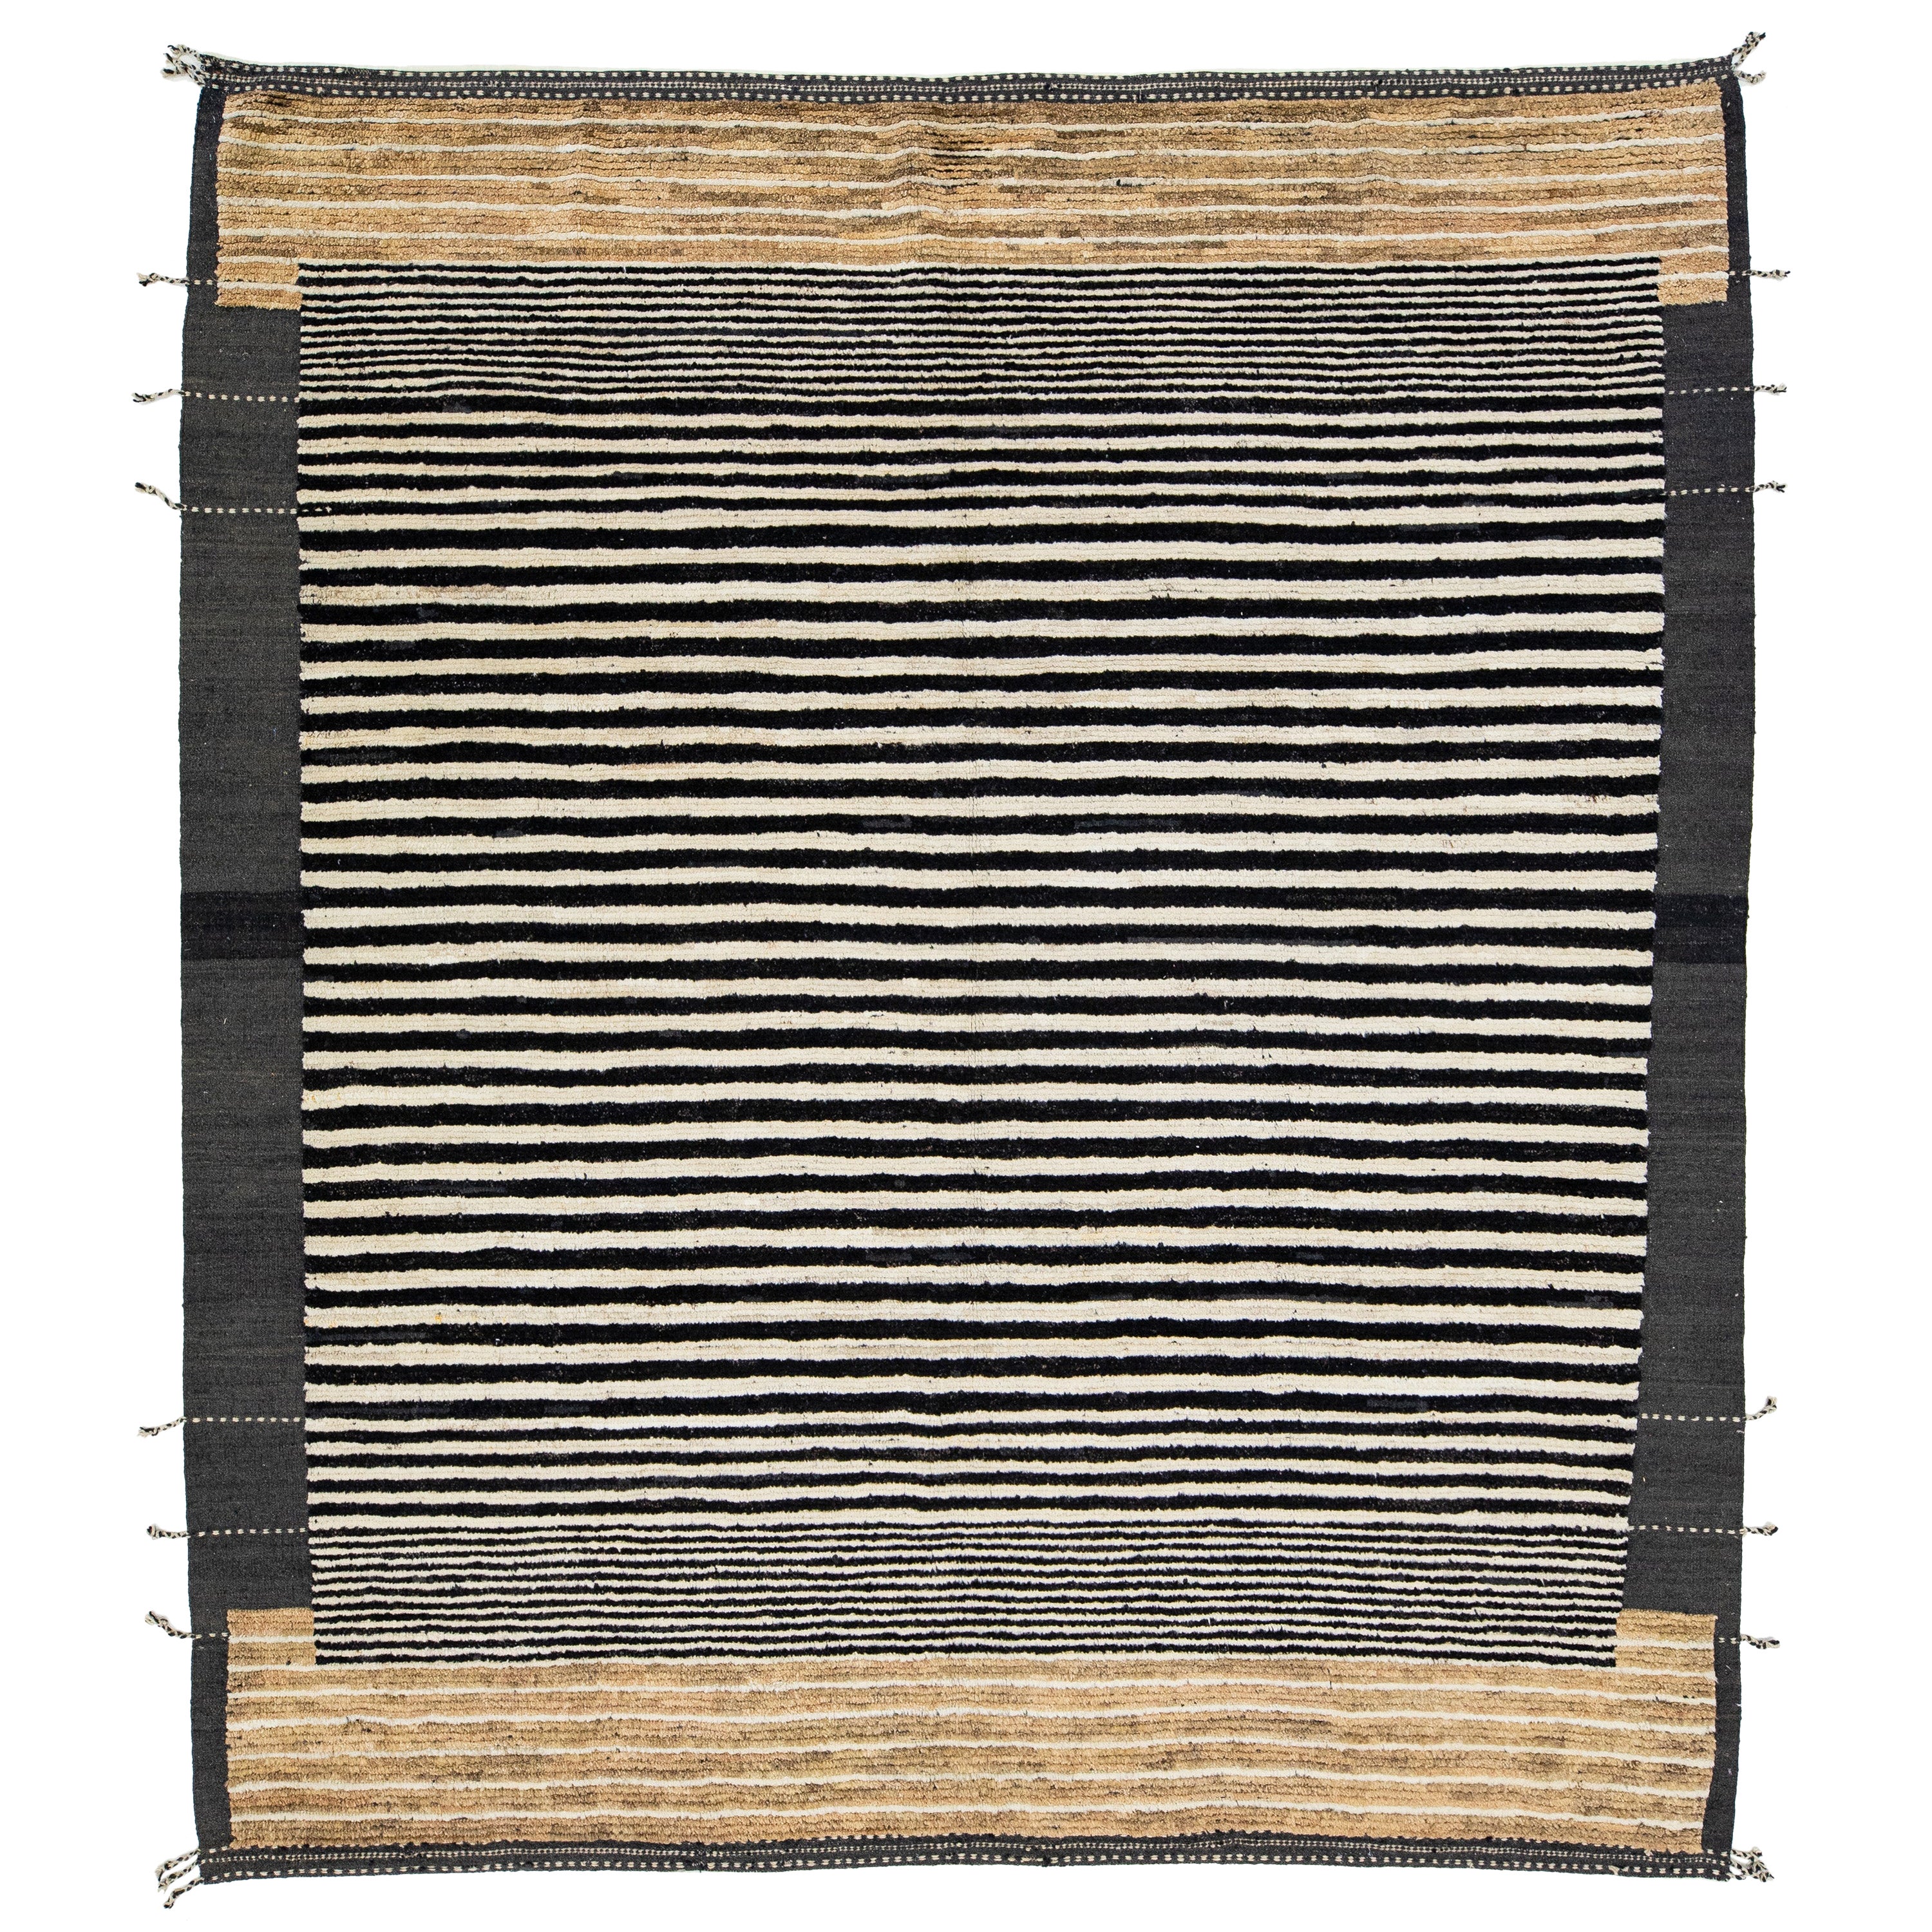 Contemporary Moroccan Wool Rug featuring Retro-inspired Design and Earthy Tones